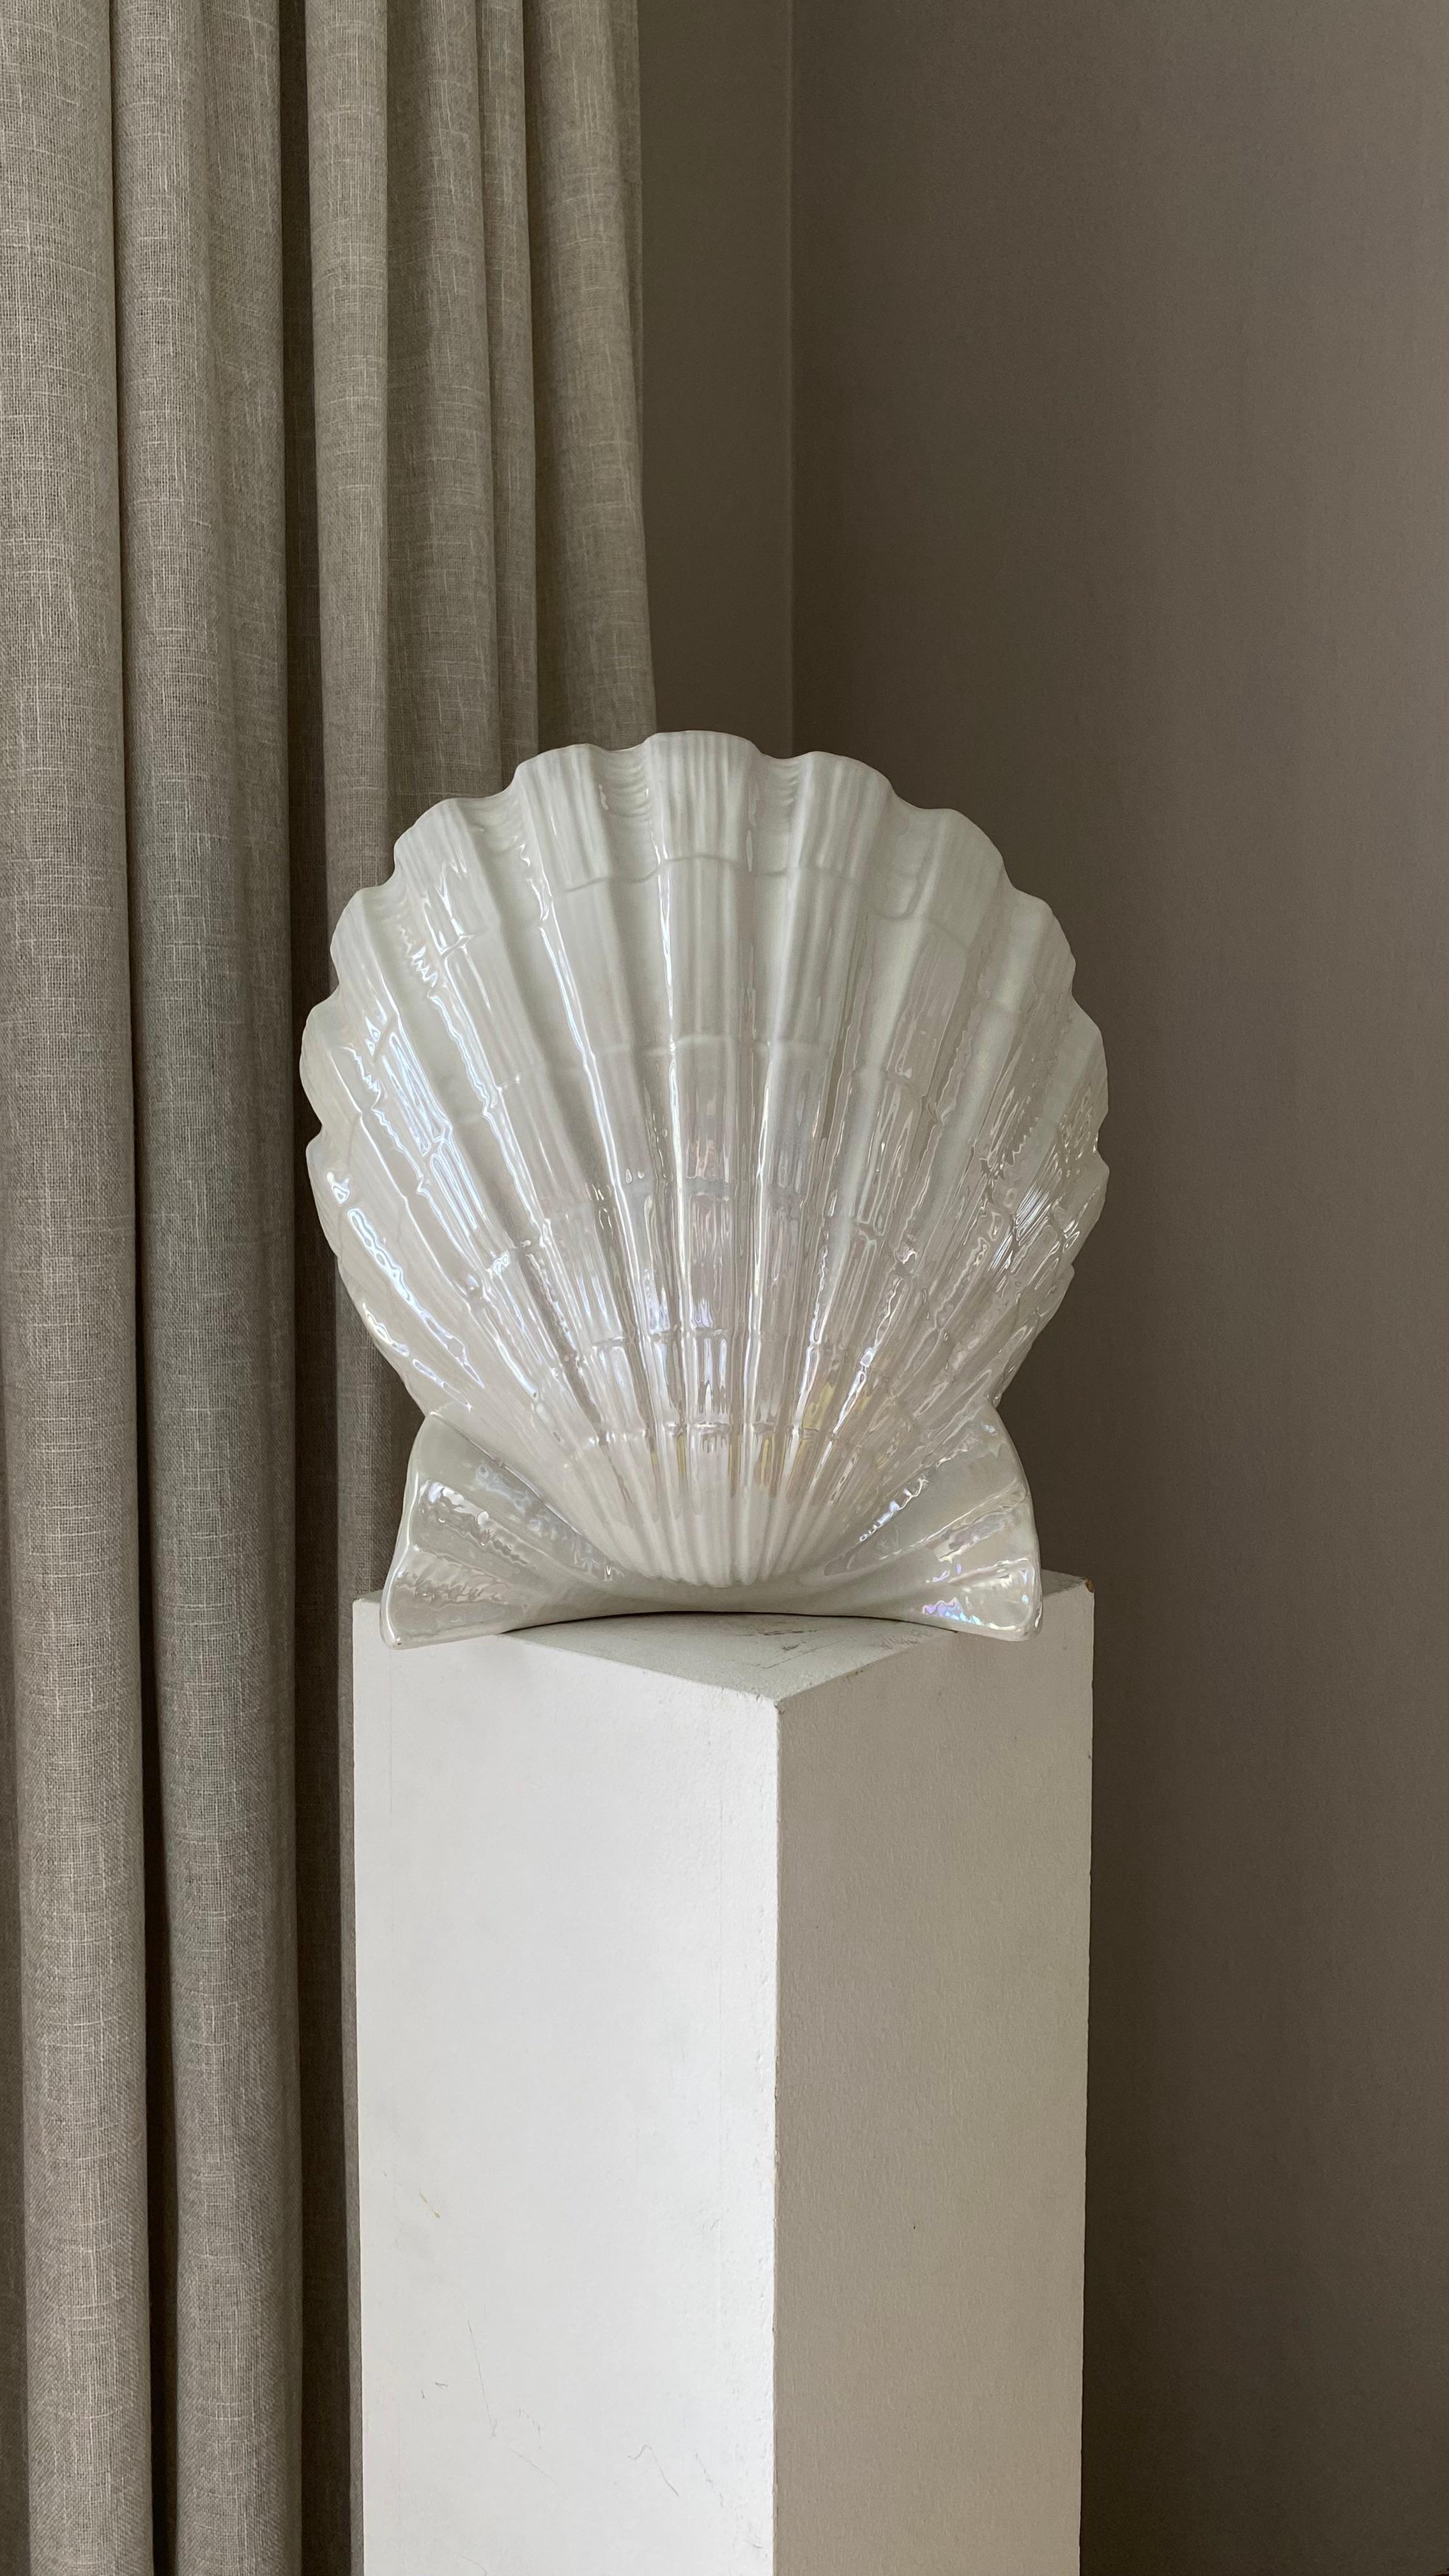 Large & unusual vintage table lamp in the shape of a shell in shimmering pearlescent white.
This elegant lamp is beautiful whether lit or lit.

Measure; Height 31, Depth 28, Width 28cm.